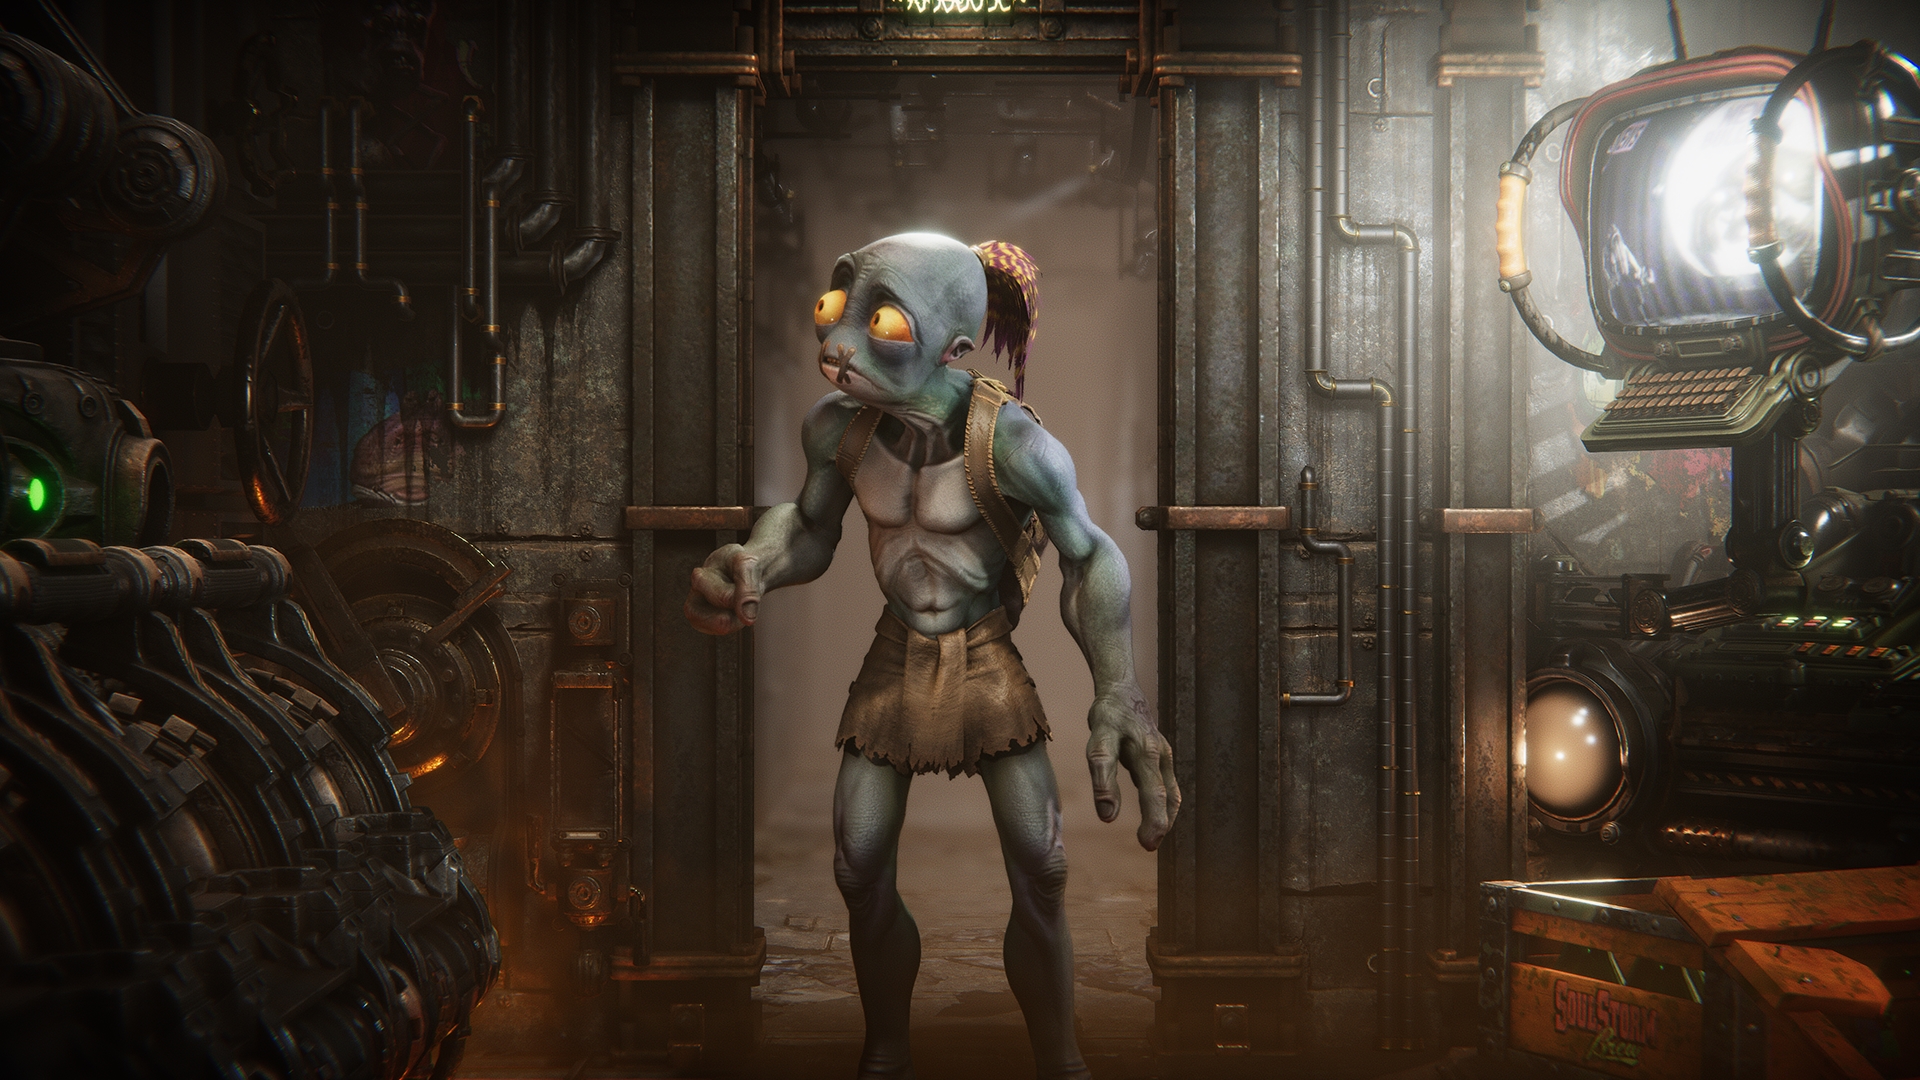 https://www.pcinvasion.com/wp-content/uploads/2021/03/Oddworld-Soulstorm-shows-off-gameplay-and-scale-in-new-trailer-2.jpg